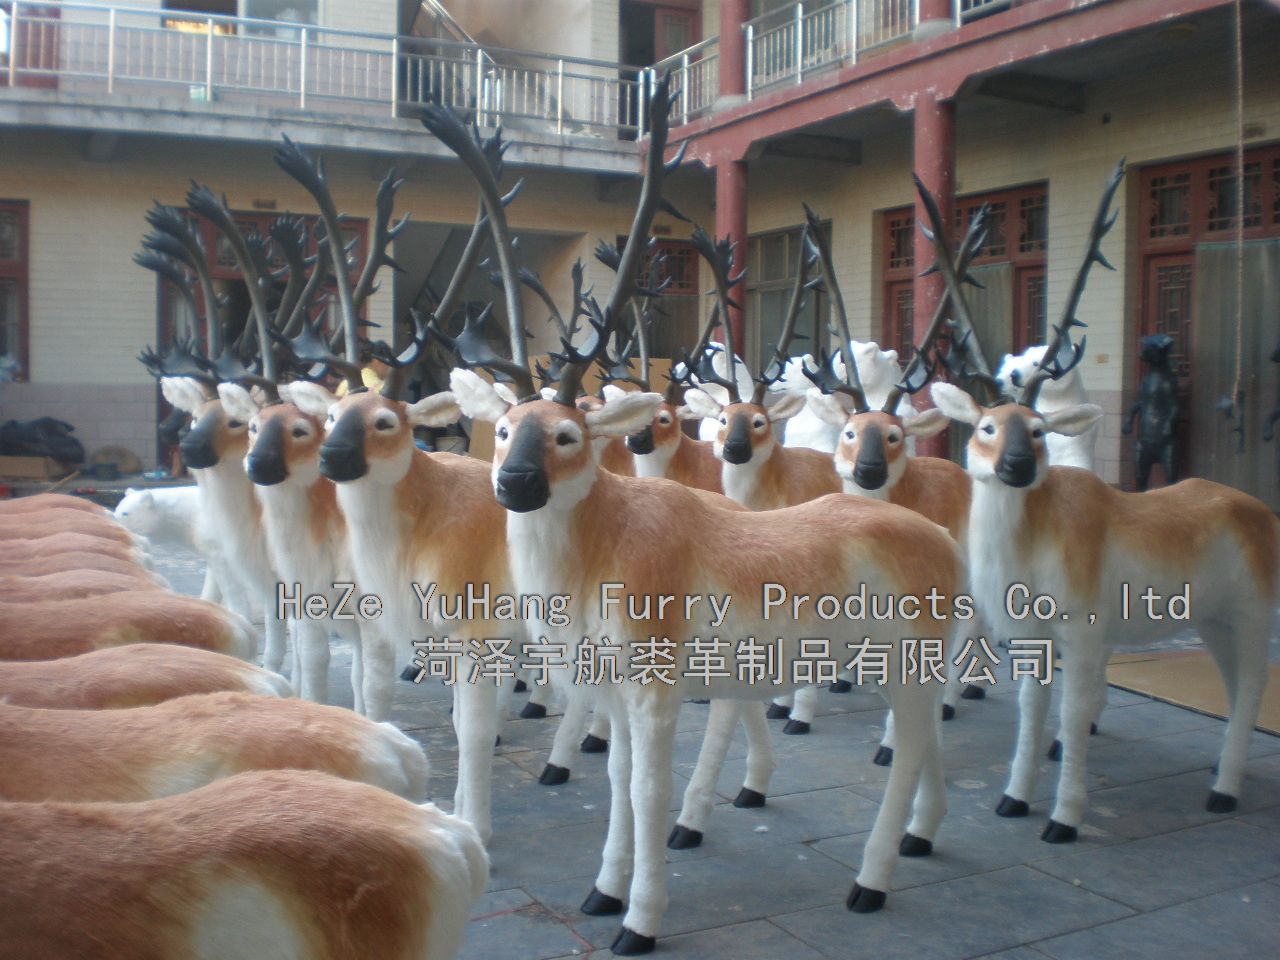 FDR13,HEZE YUHANG FURRY PRODUCTS CO., LTD.